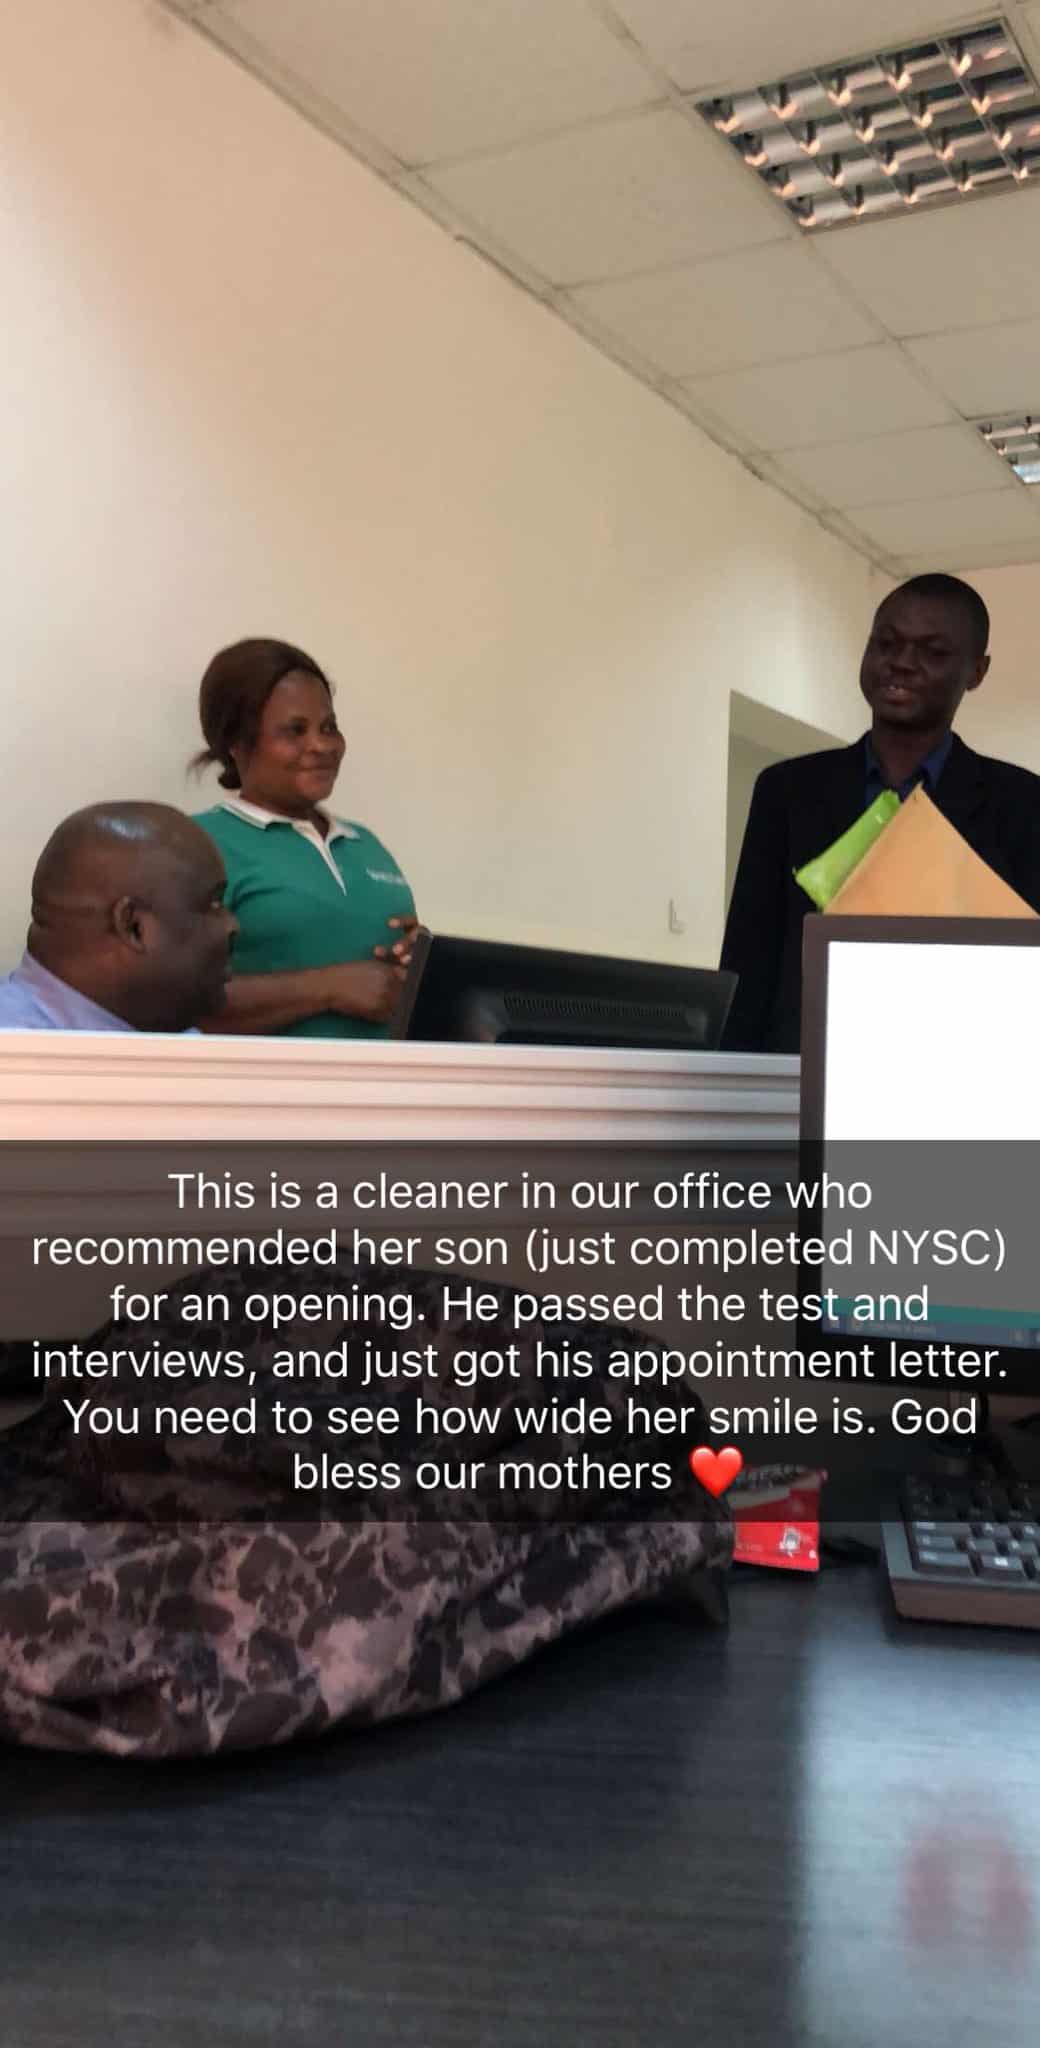 Cleaner recommends son who just completed NYSC at workplace, gets hired